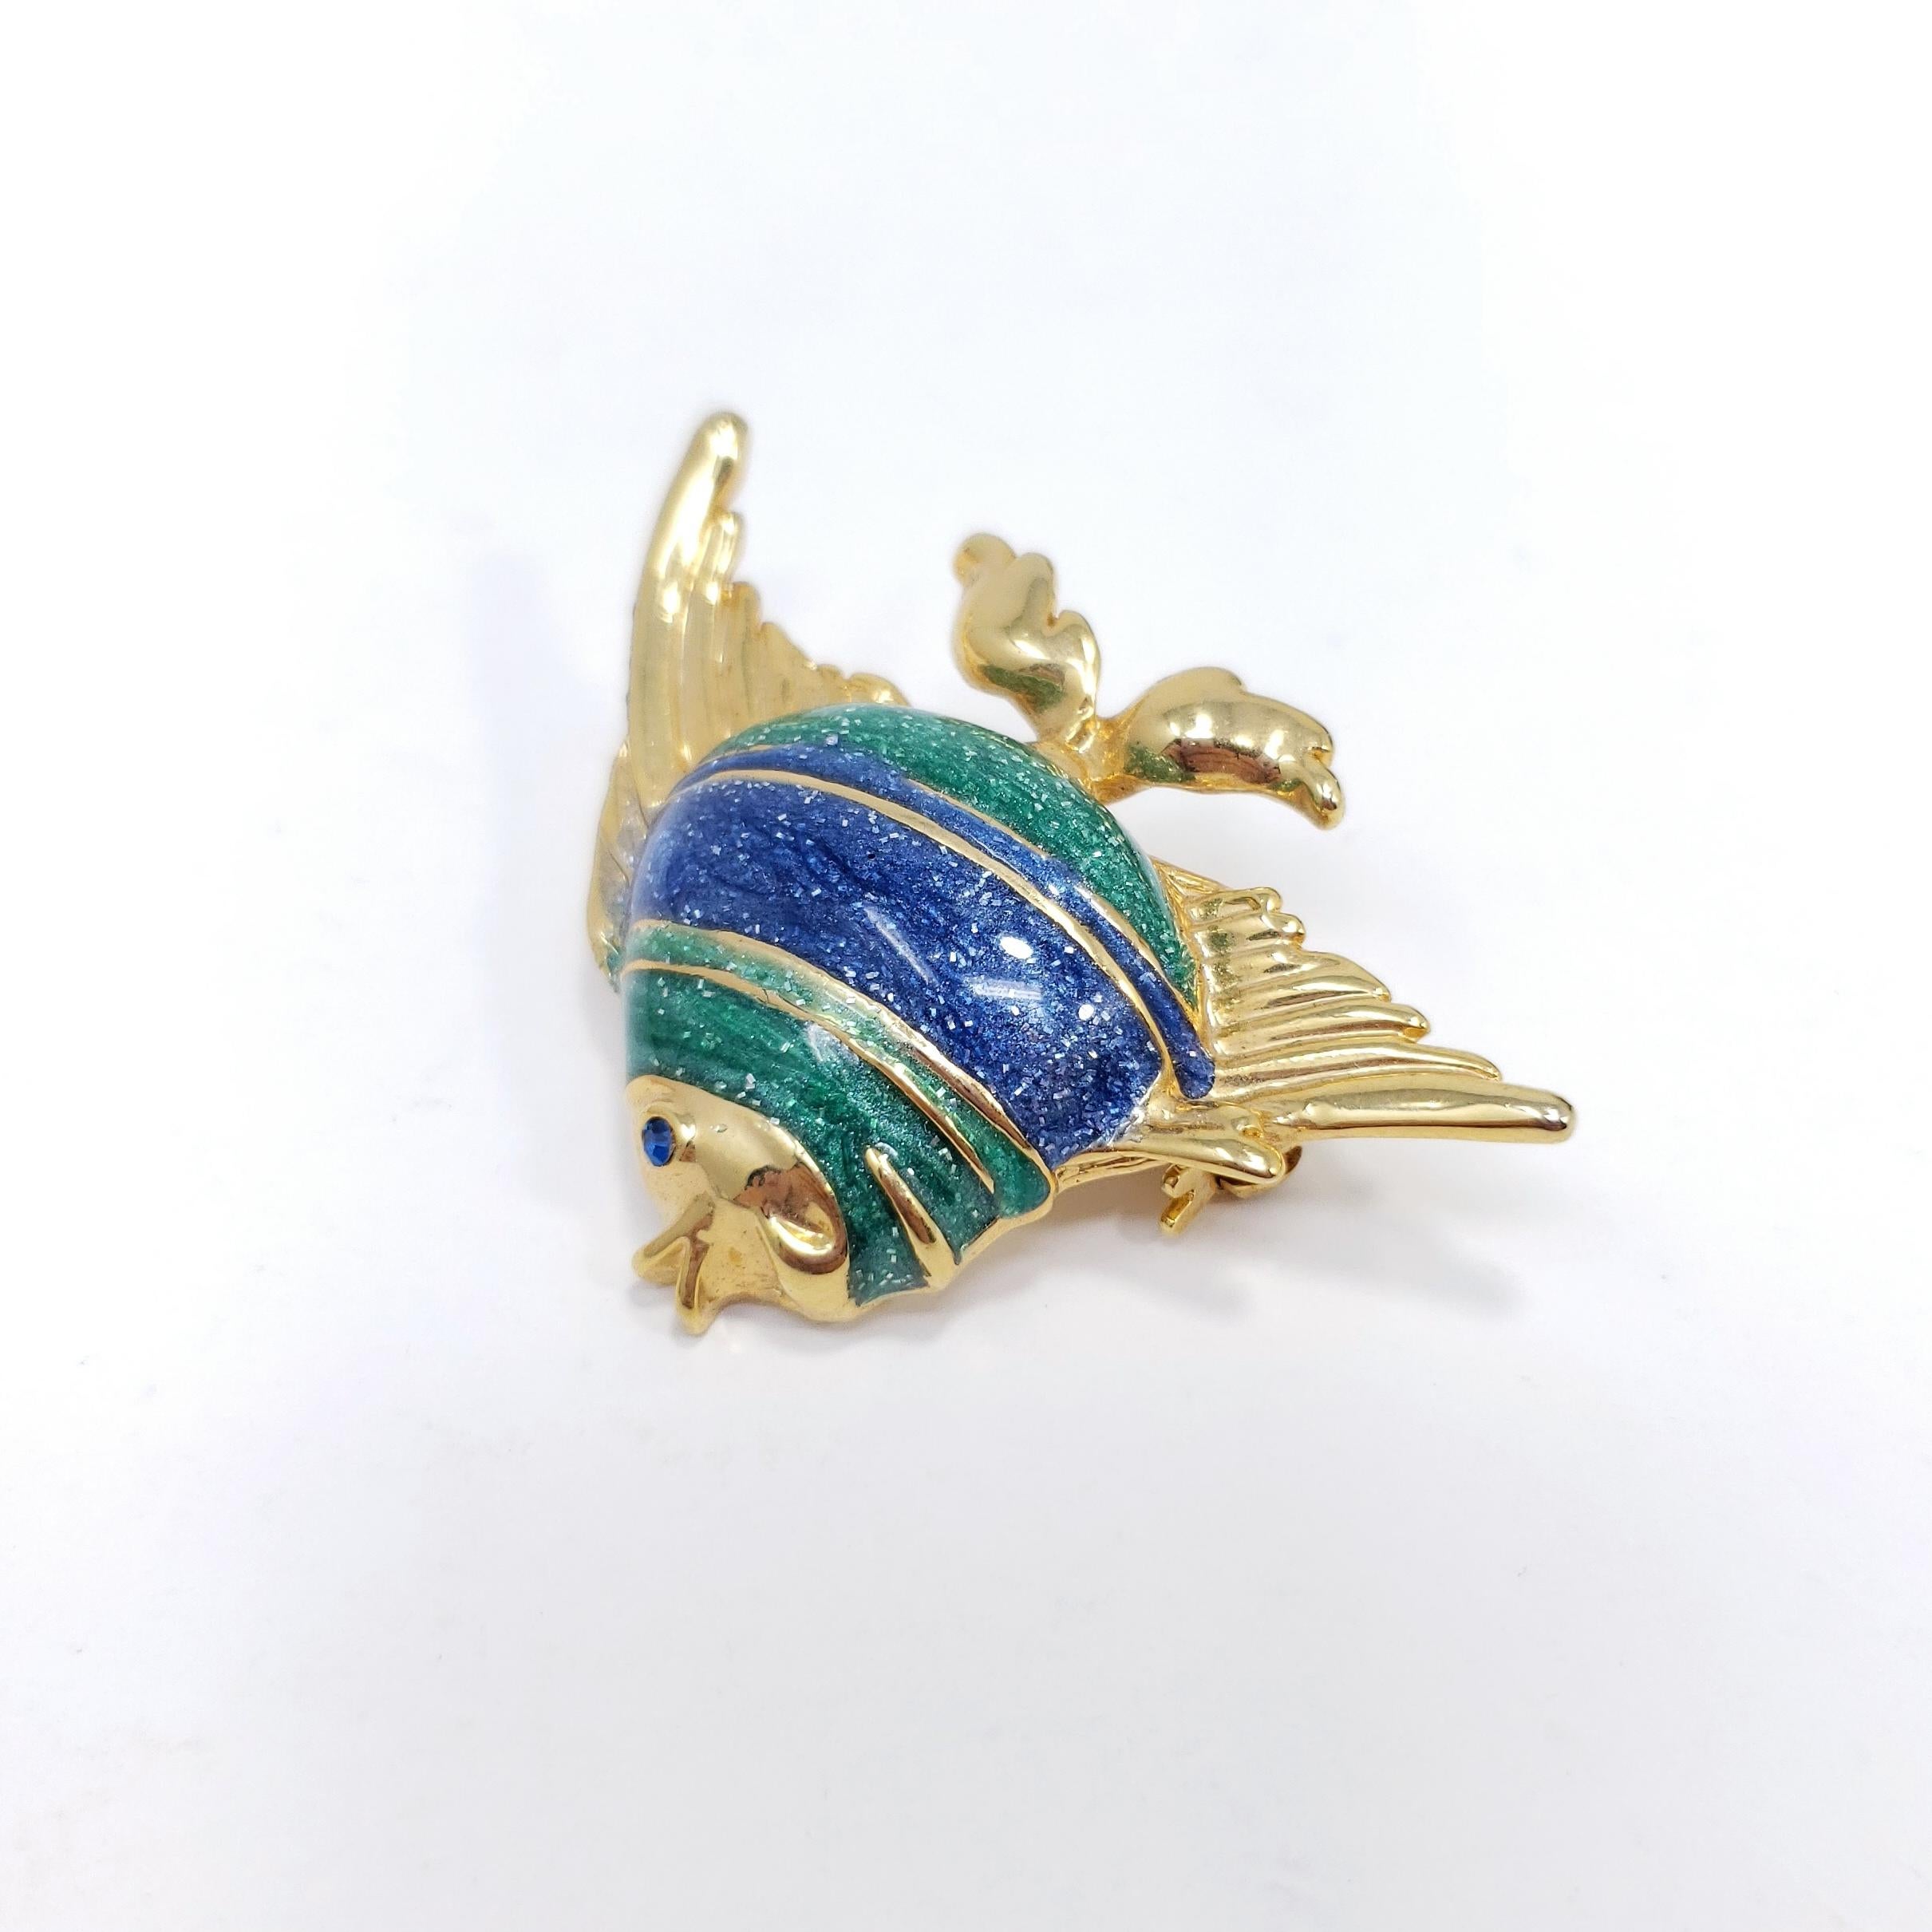 A stylish vintage pin brooch, featuring a vibrant angel fish decorated with green and blue enamel.

Goldplated.

Circa late 1900s.